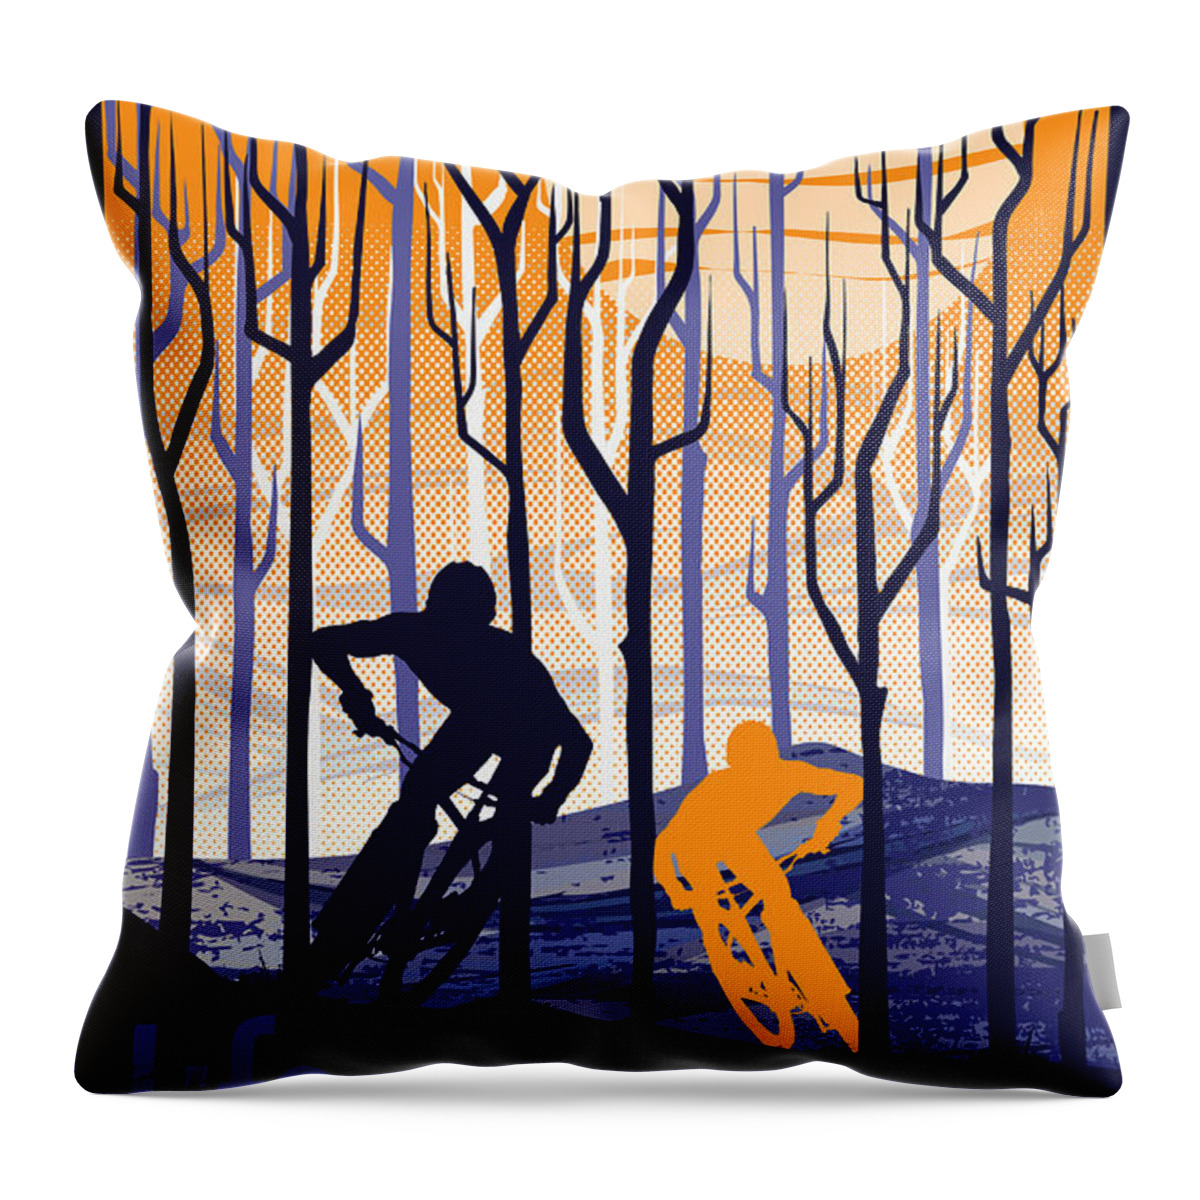 Mountain Bike Poster Throw Pillow featuring the painting Retro Mountain Bike Poster Life Behind Bars by Sassan Filsoof